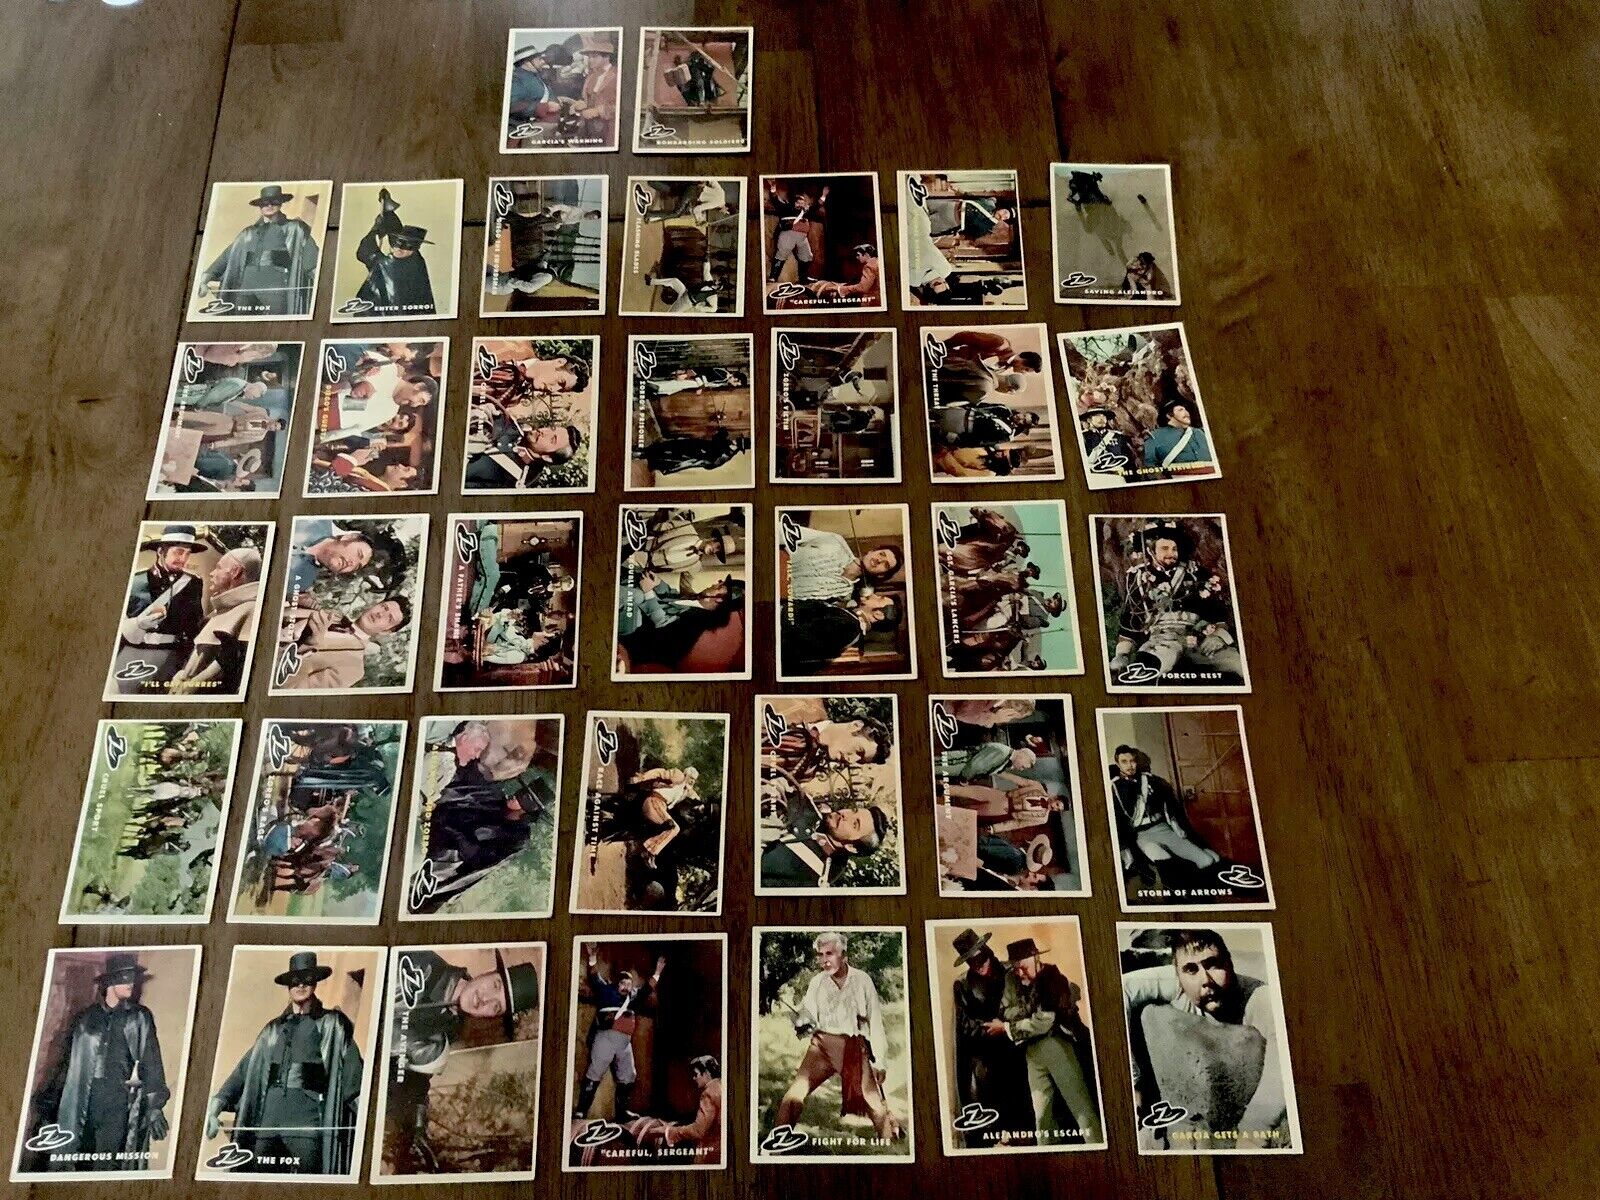 1958 Topps ZORRO Card Lot Of 37 Cards - Very Nice Condition